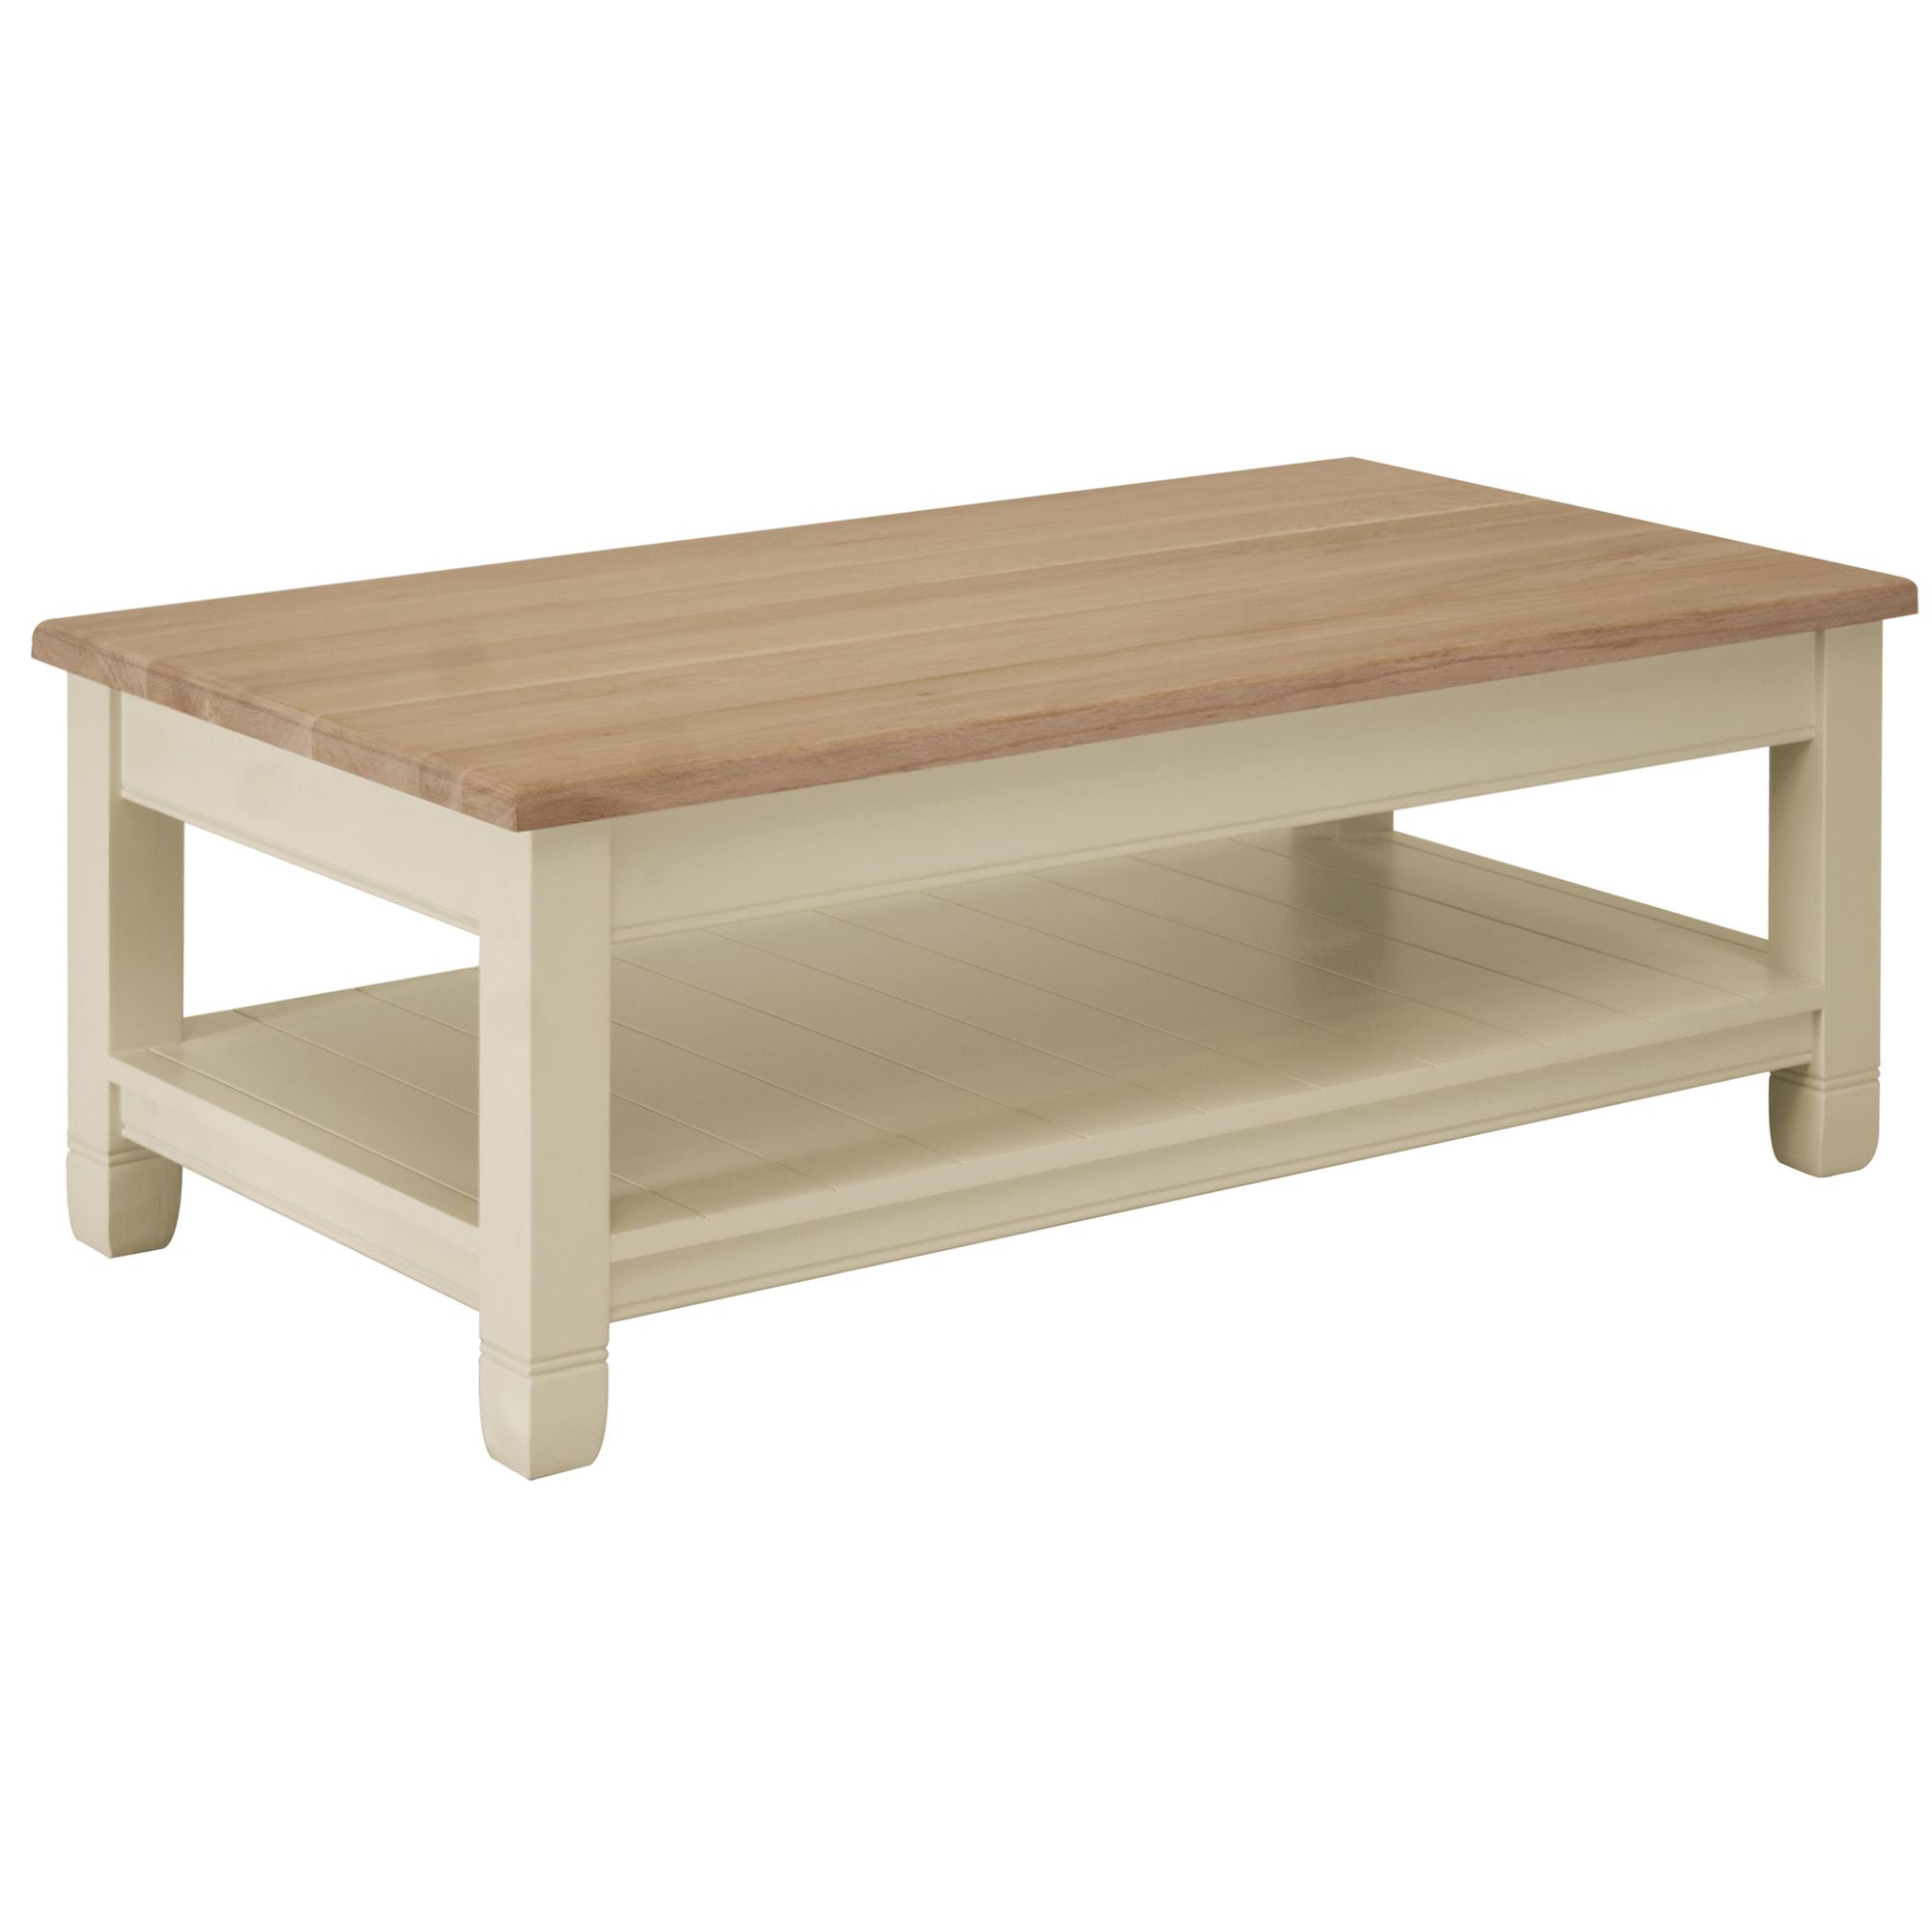 John Lewis Neptune Chichester Square Coffee Table